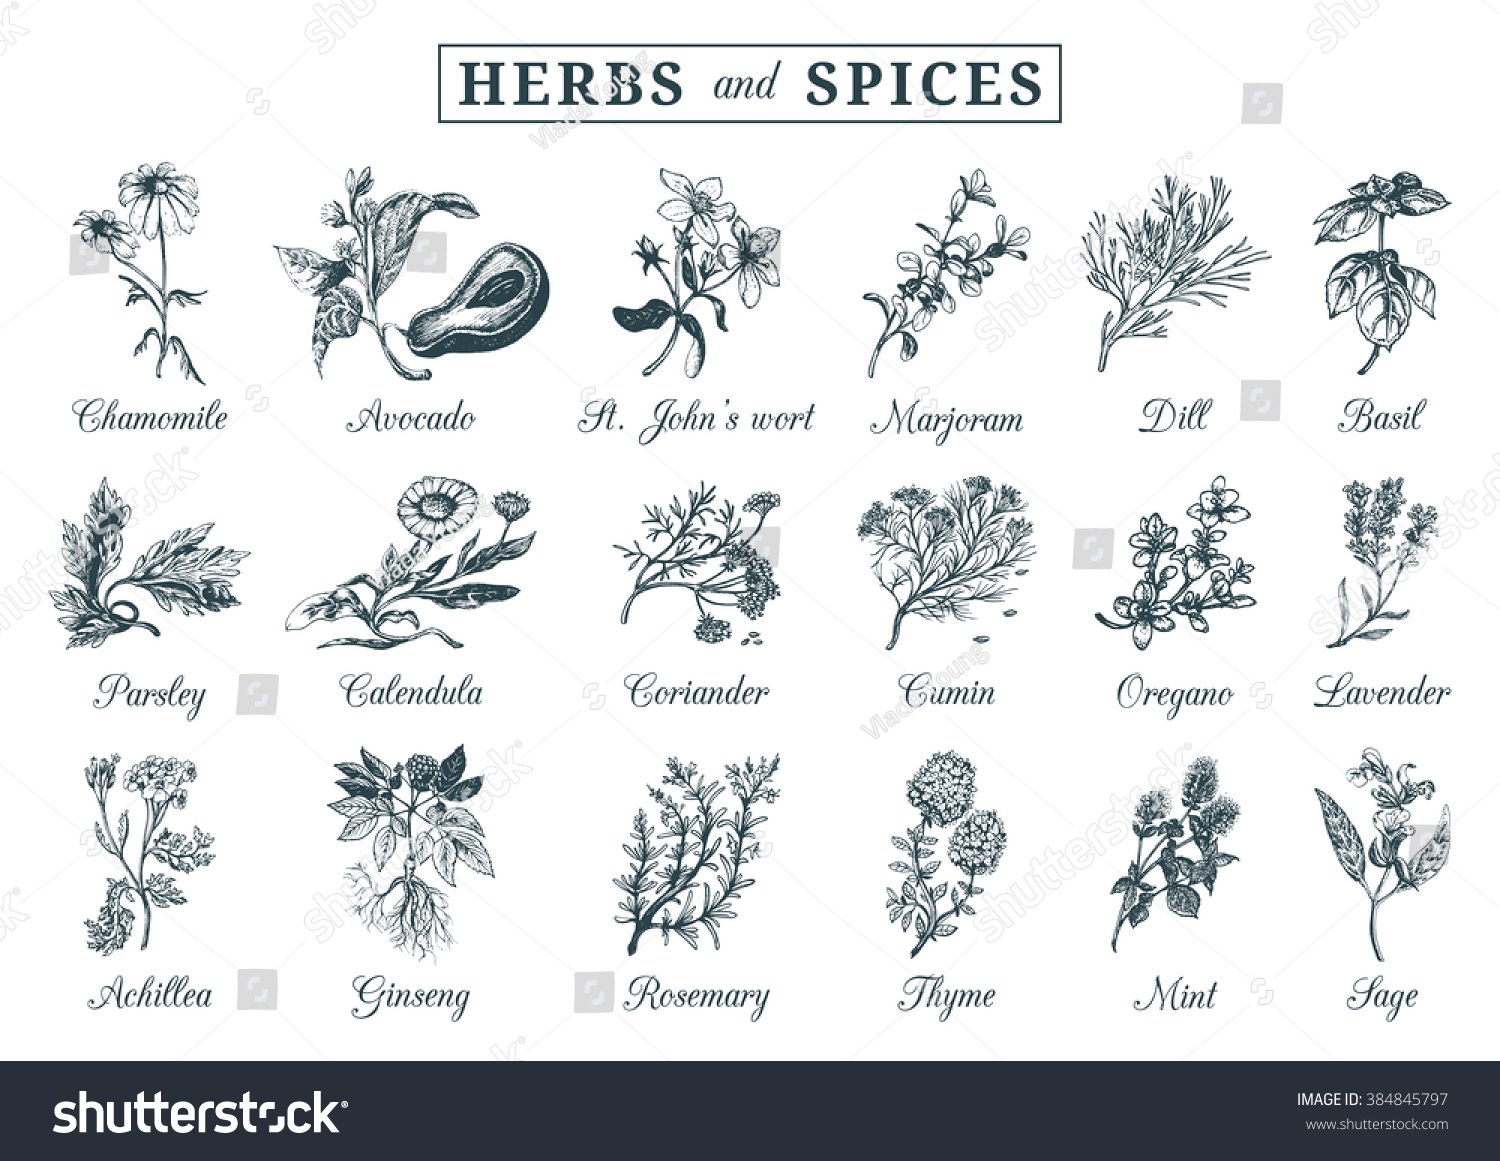 Herbs and spices set. Hand drawn officinalis, medicinal, cosmetic plants. Engraving botanical illustrations for tags. Vector healing wild flowers sketches for labels. #384845797